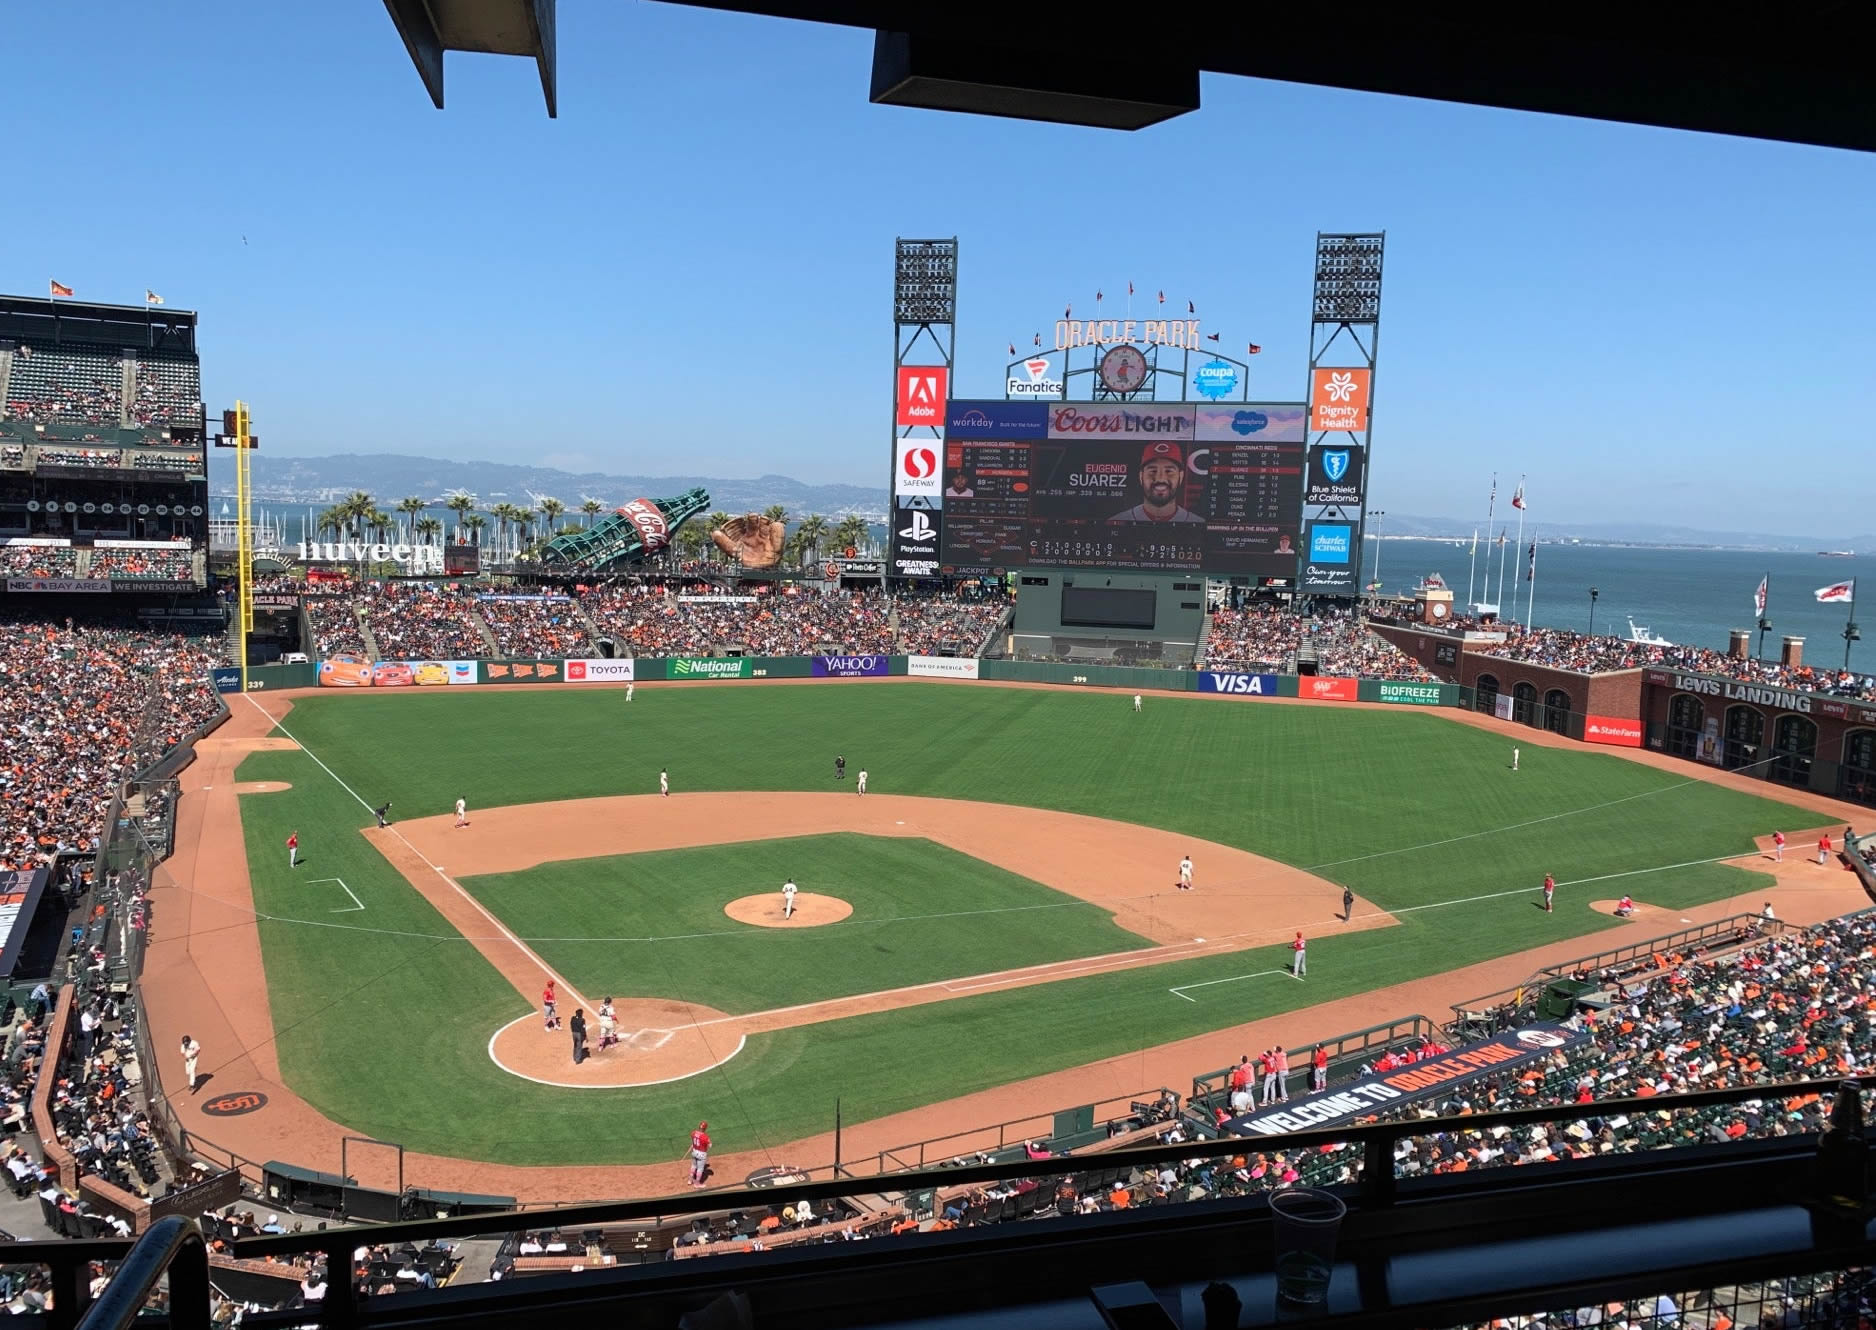 Shaded Seats at Oracle Park - Find Giants Tickets in the Shade